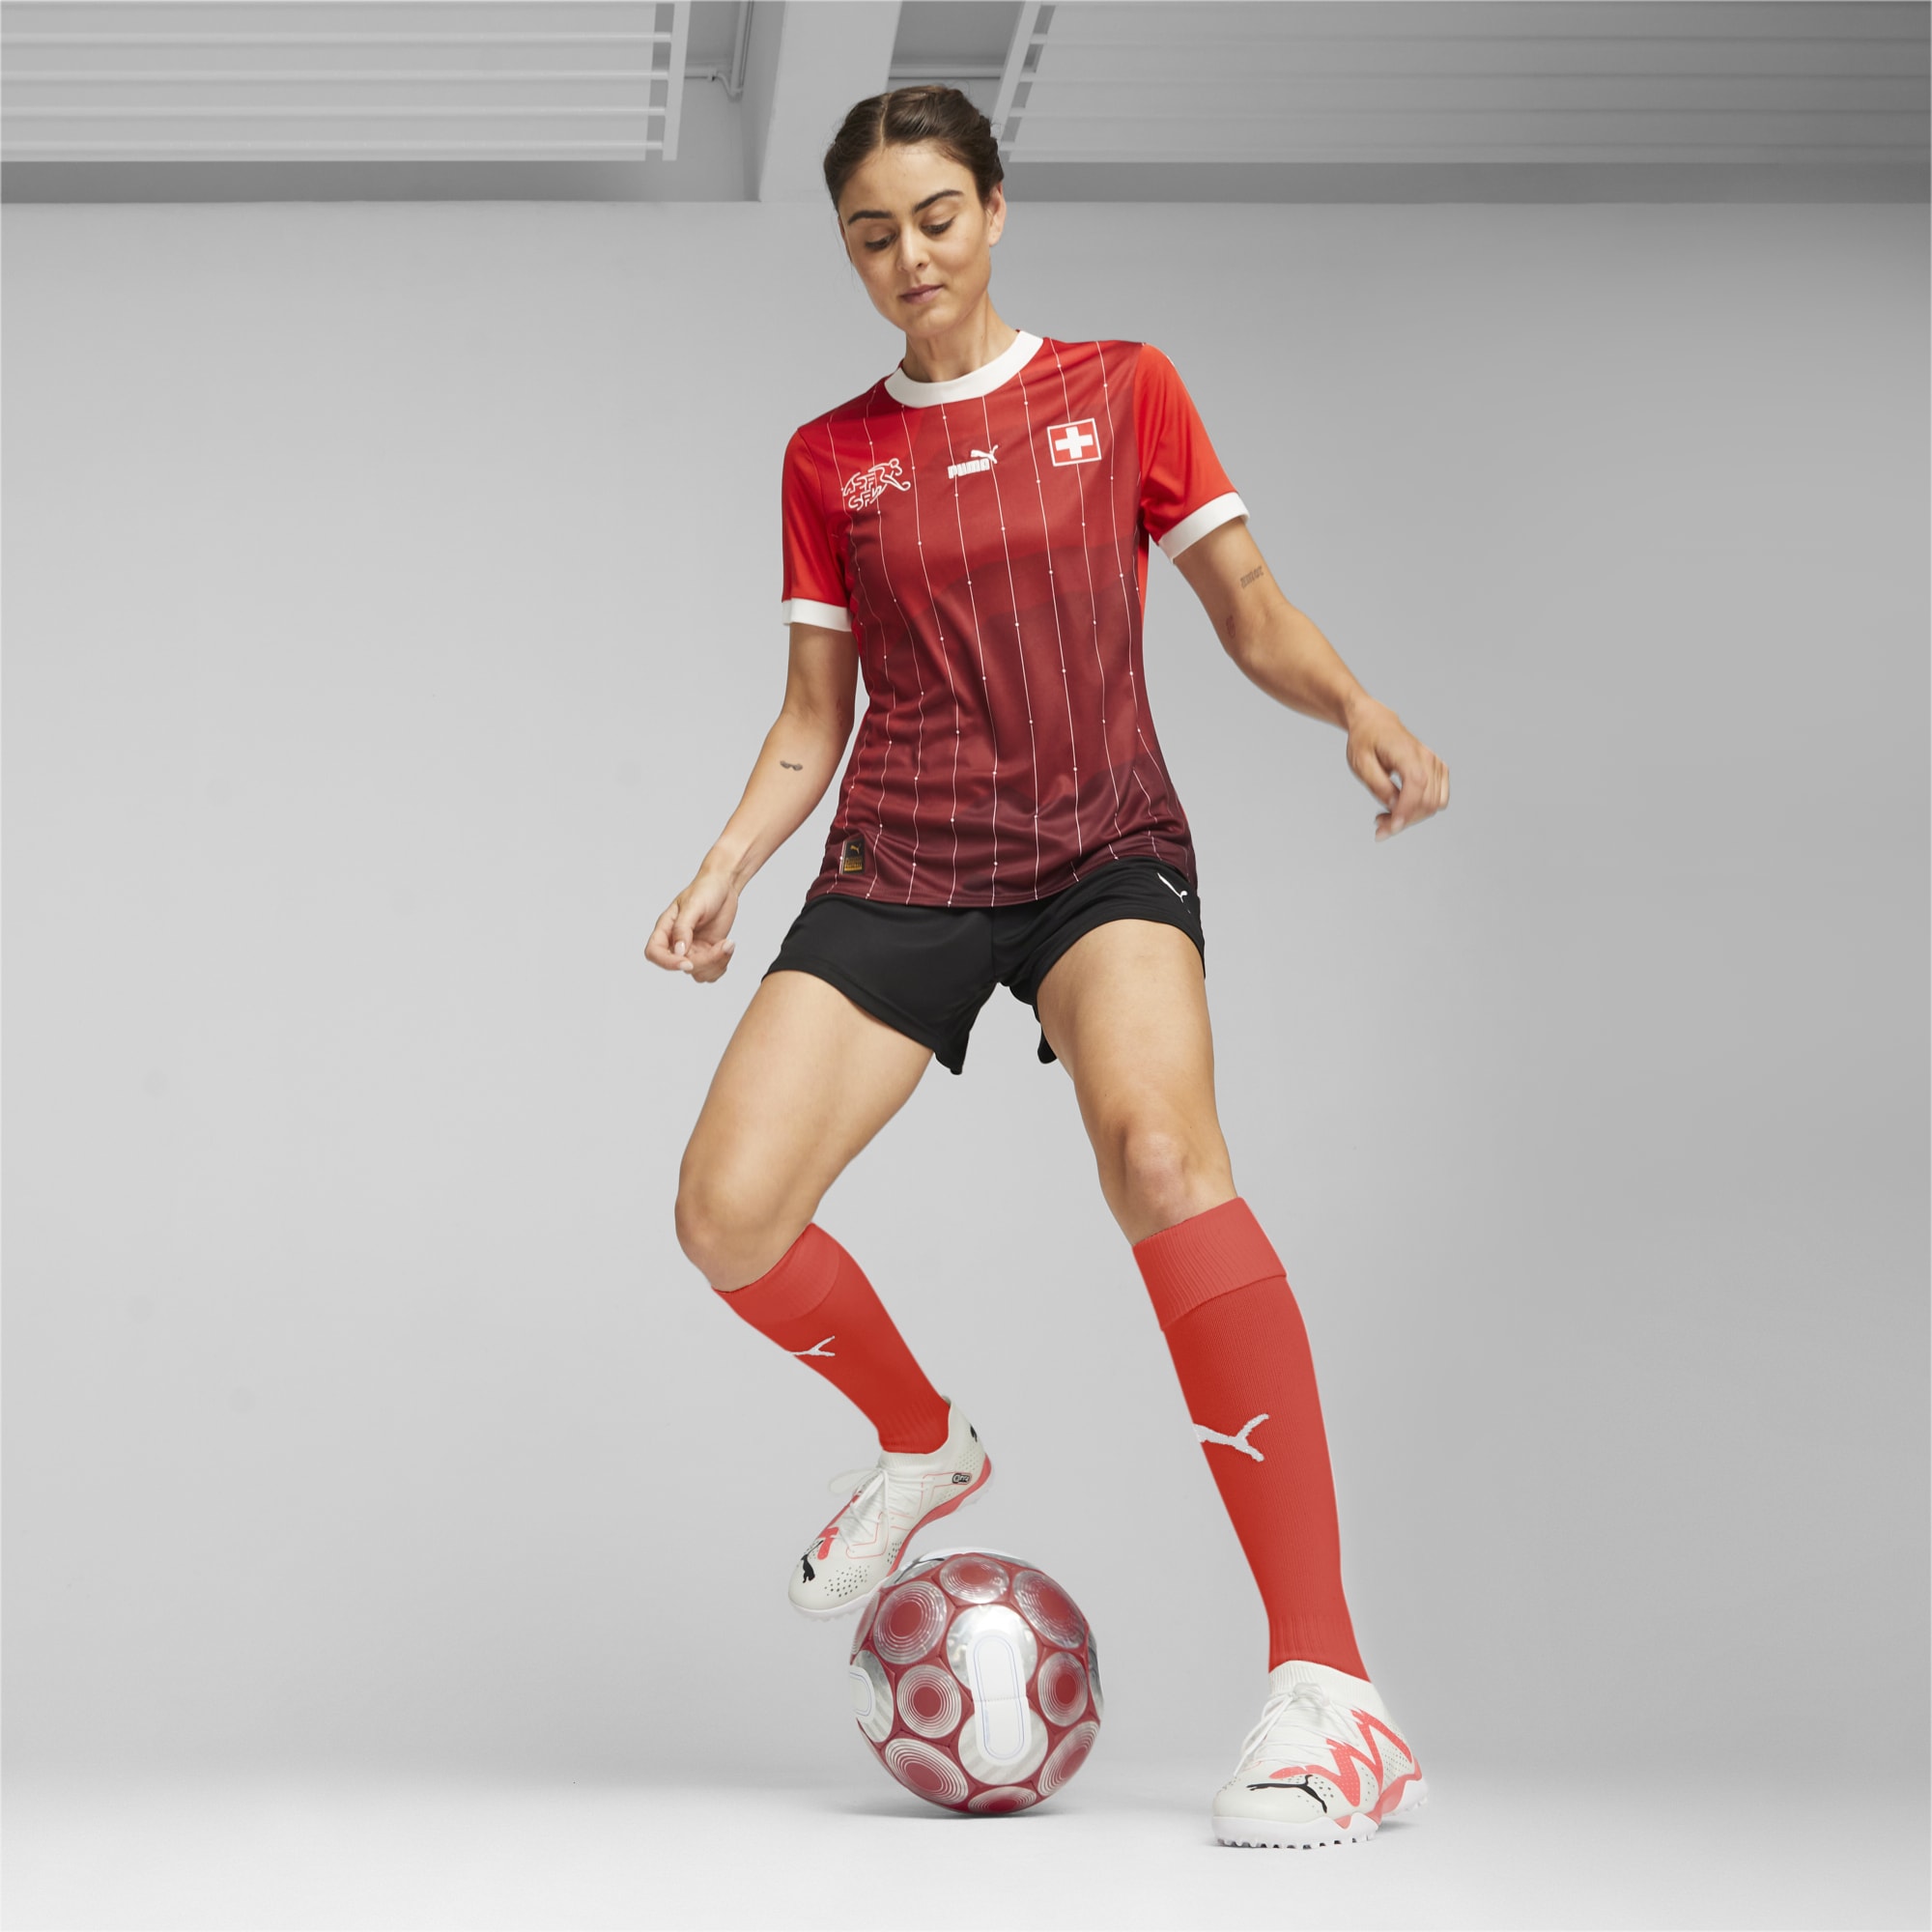 PUMA Switzerland 23/24 Women's World Cup Home Jersey, Red/White, Size S, Clothing